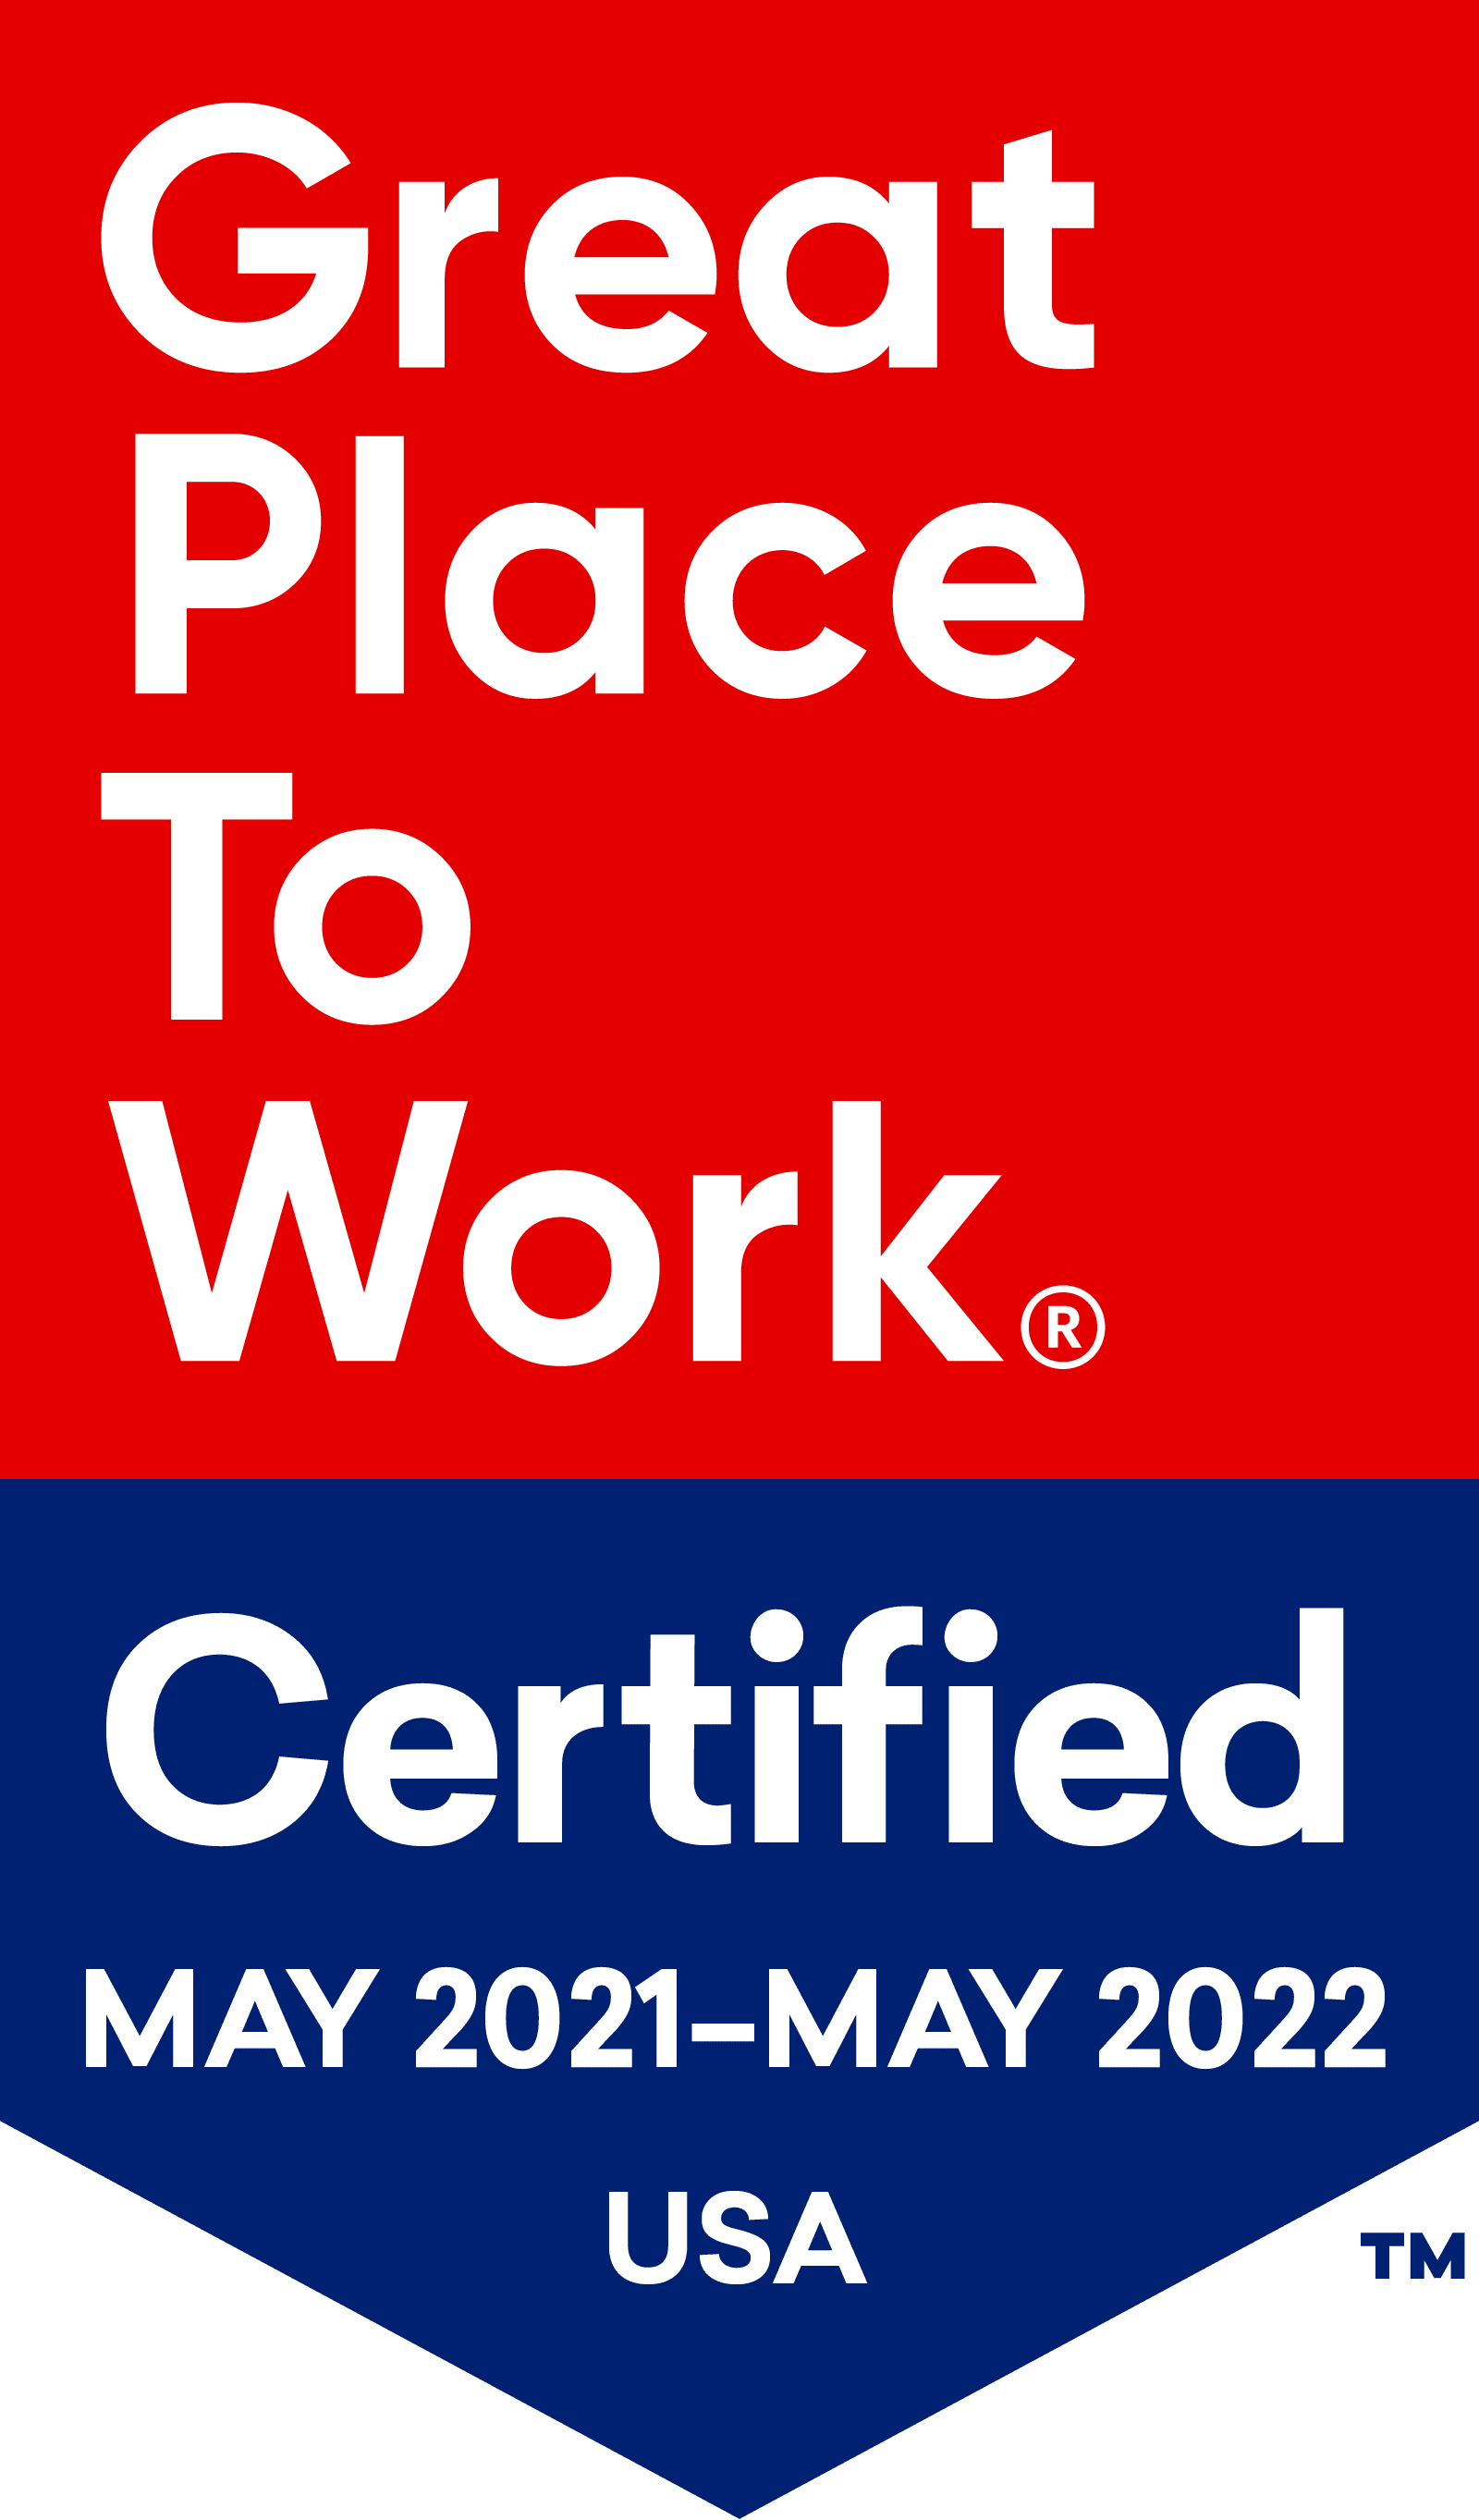 Chancellor Gardens is Great Place To Work Certified